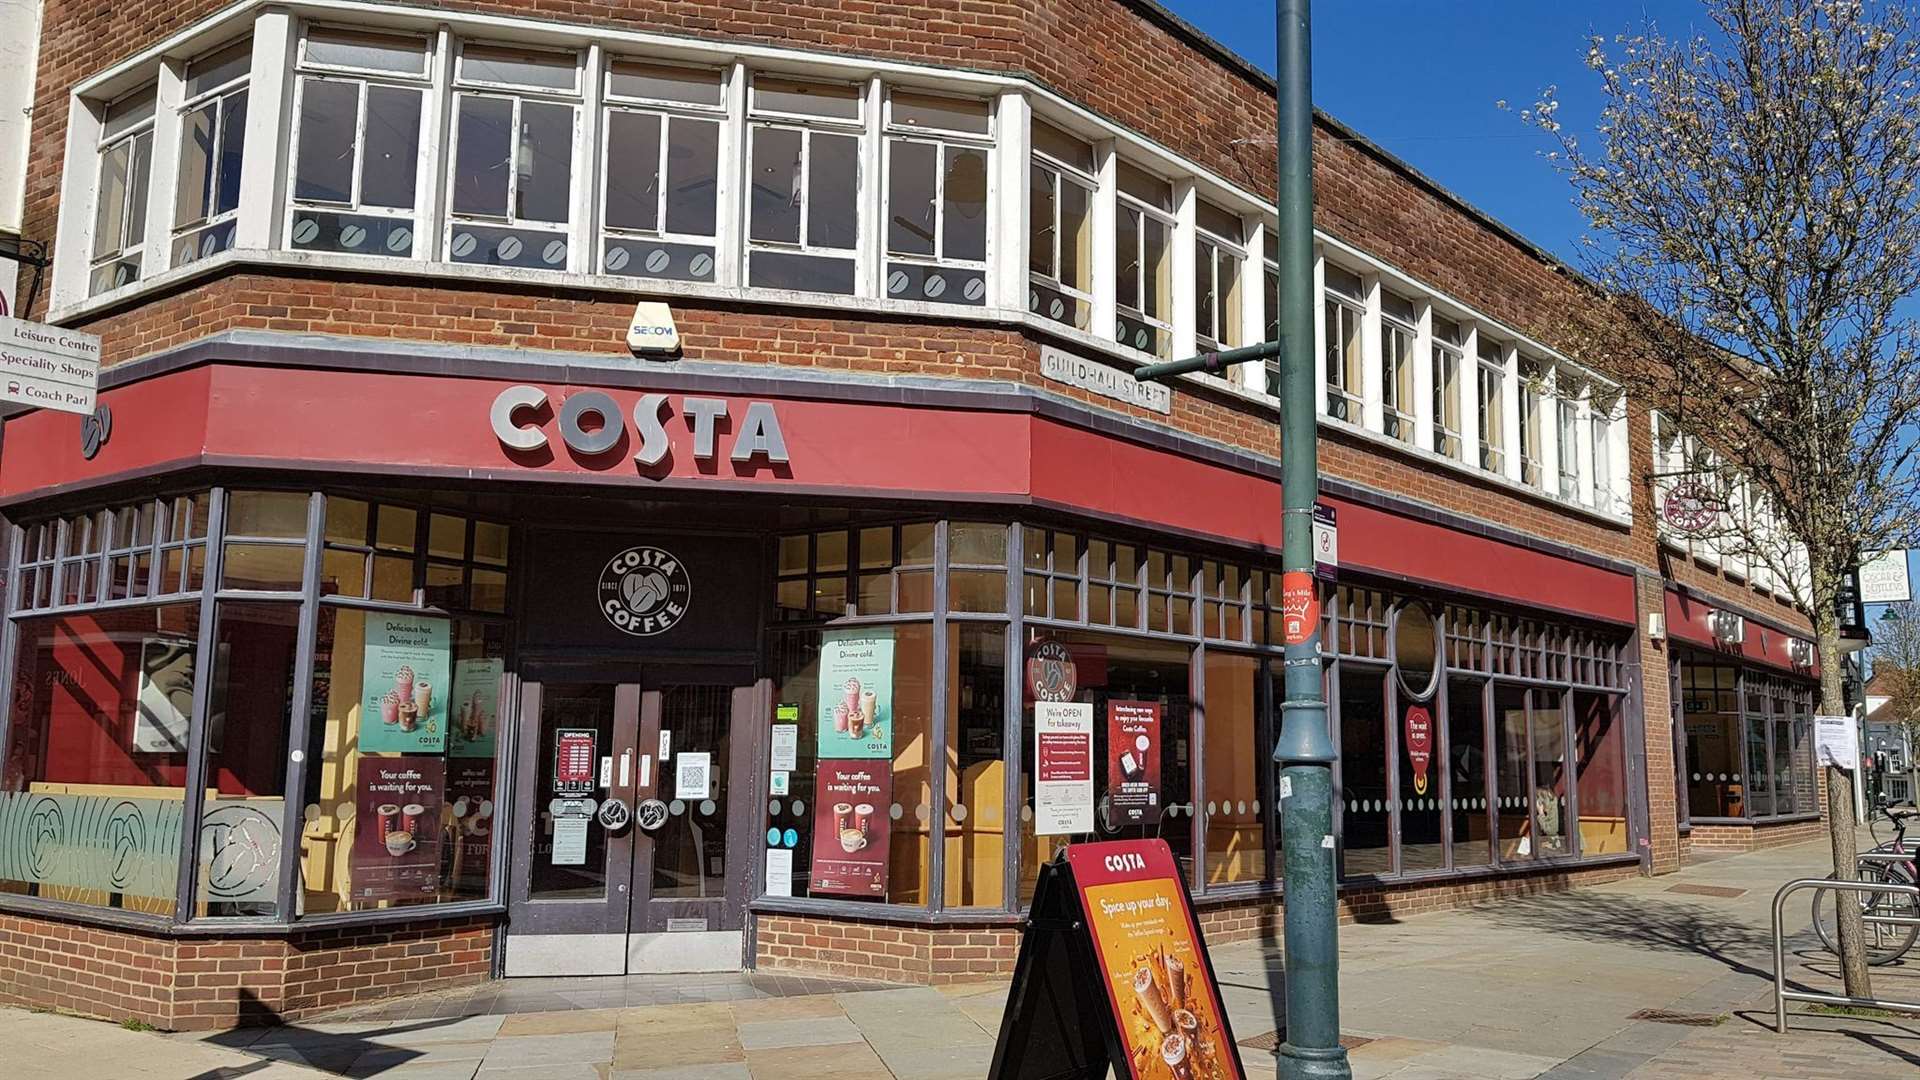 Costa in Canterbury high street is on the market, but staff are 'totally unaware'